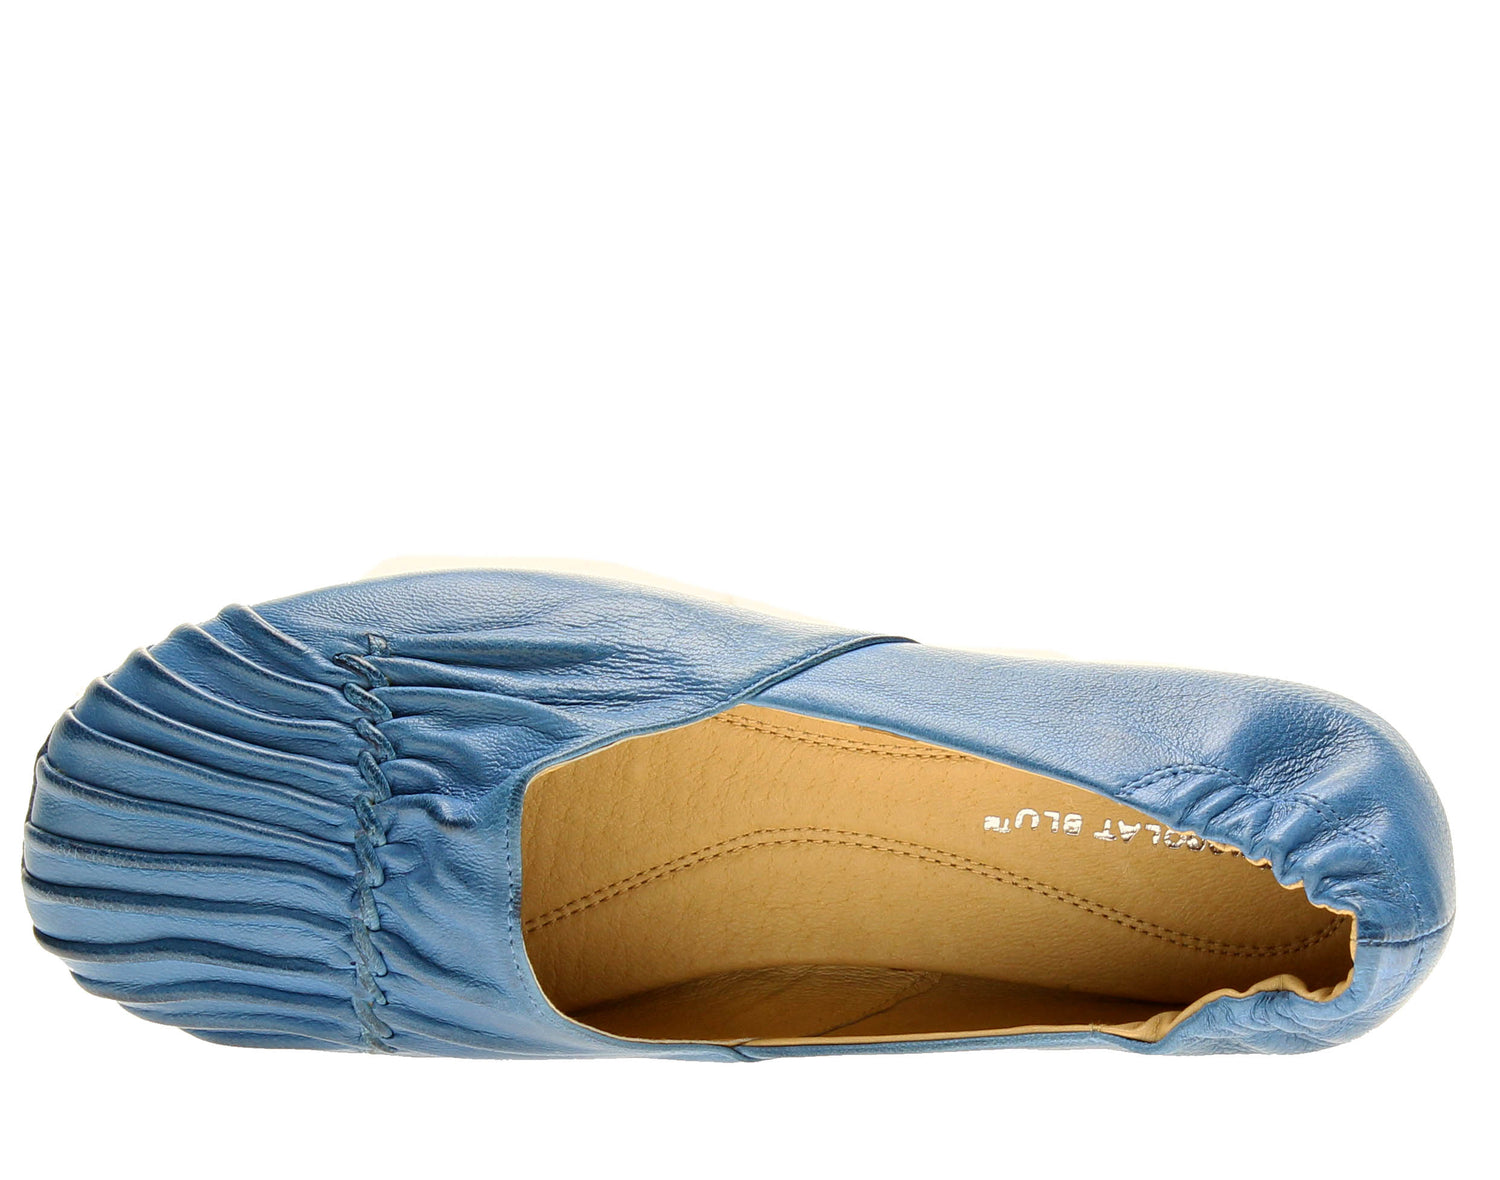 Chocolat Blu Cam2 Pleated Moccasin Flat Women's Shoes